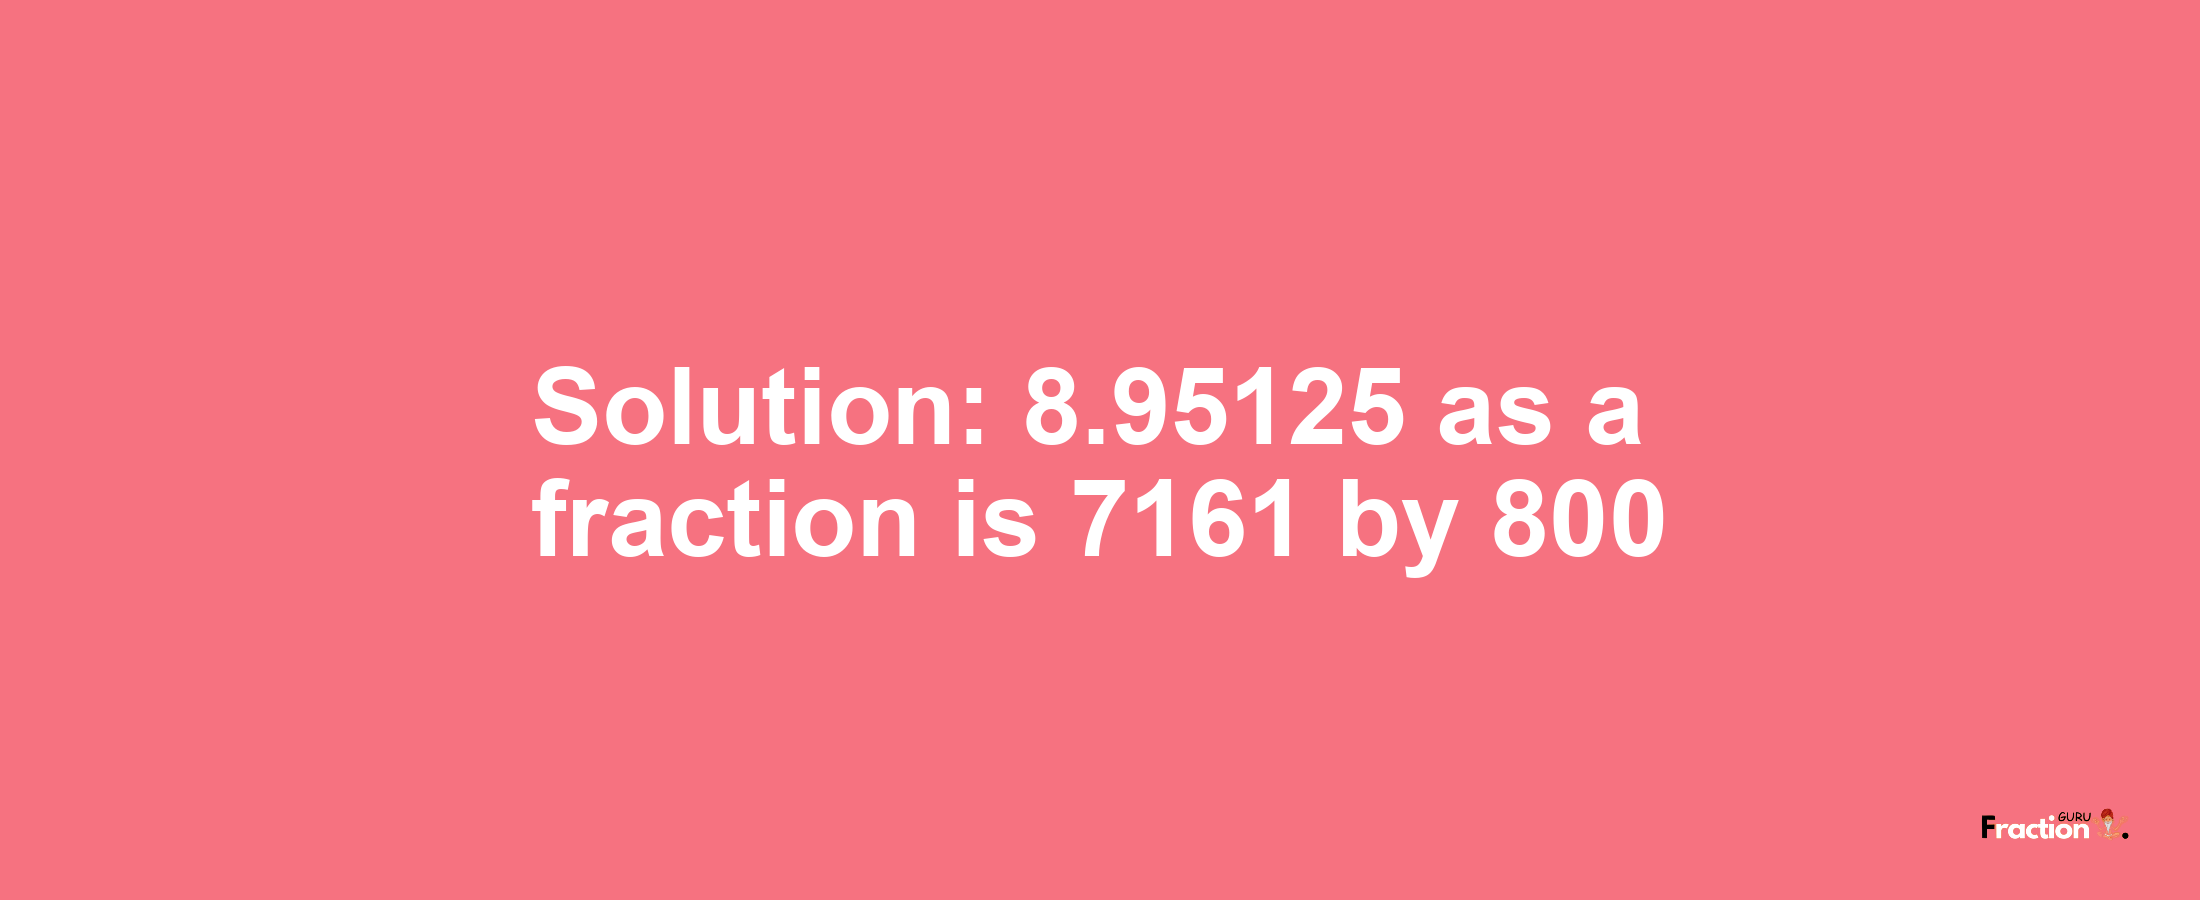 Solution:8.95125 as a fraction is 7161/800